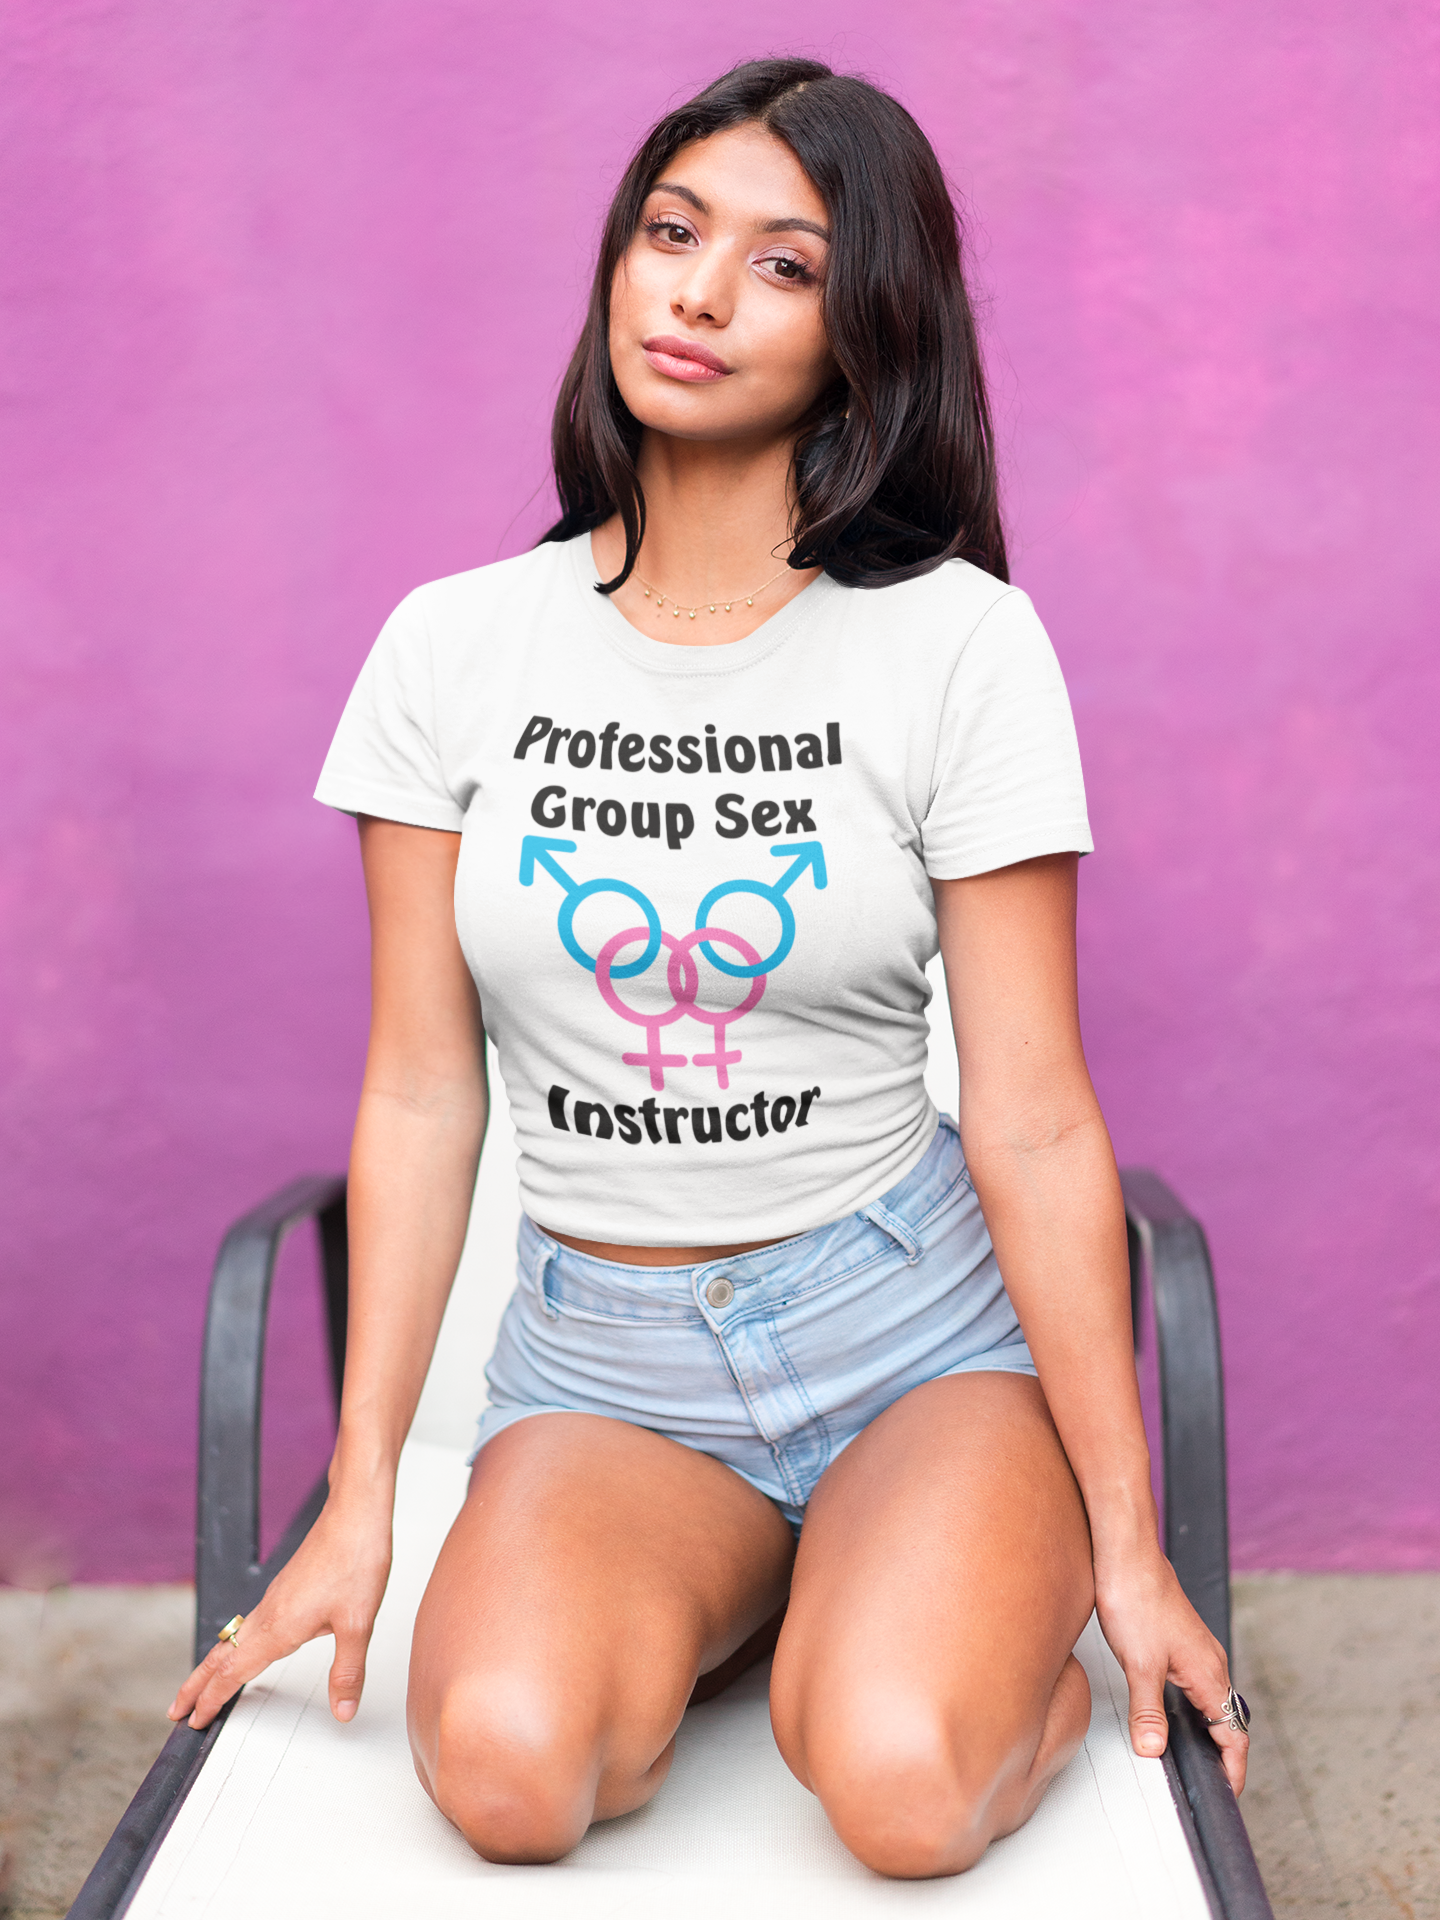 Professional Group Sex Instructor